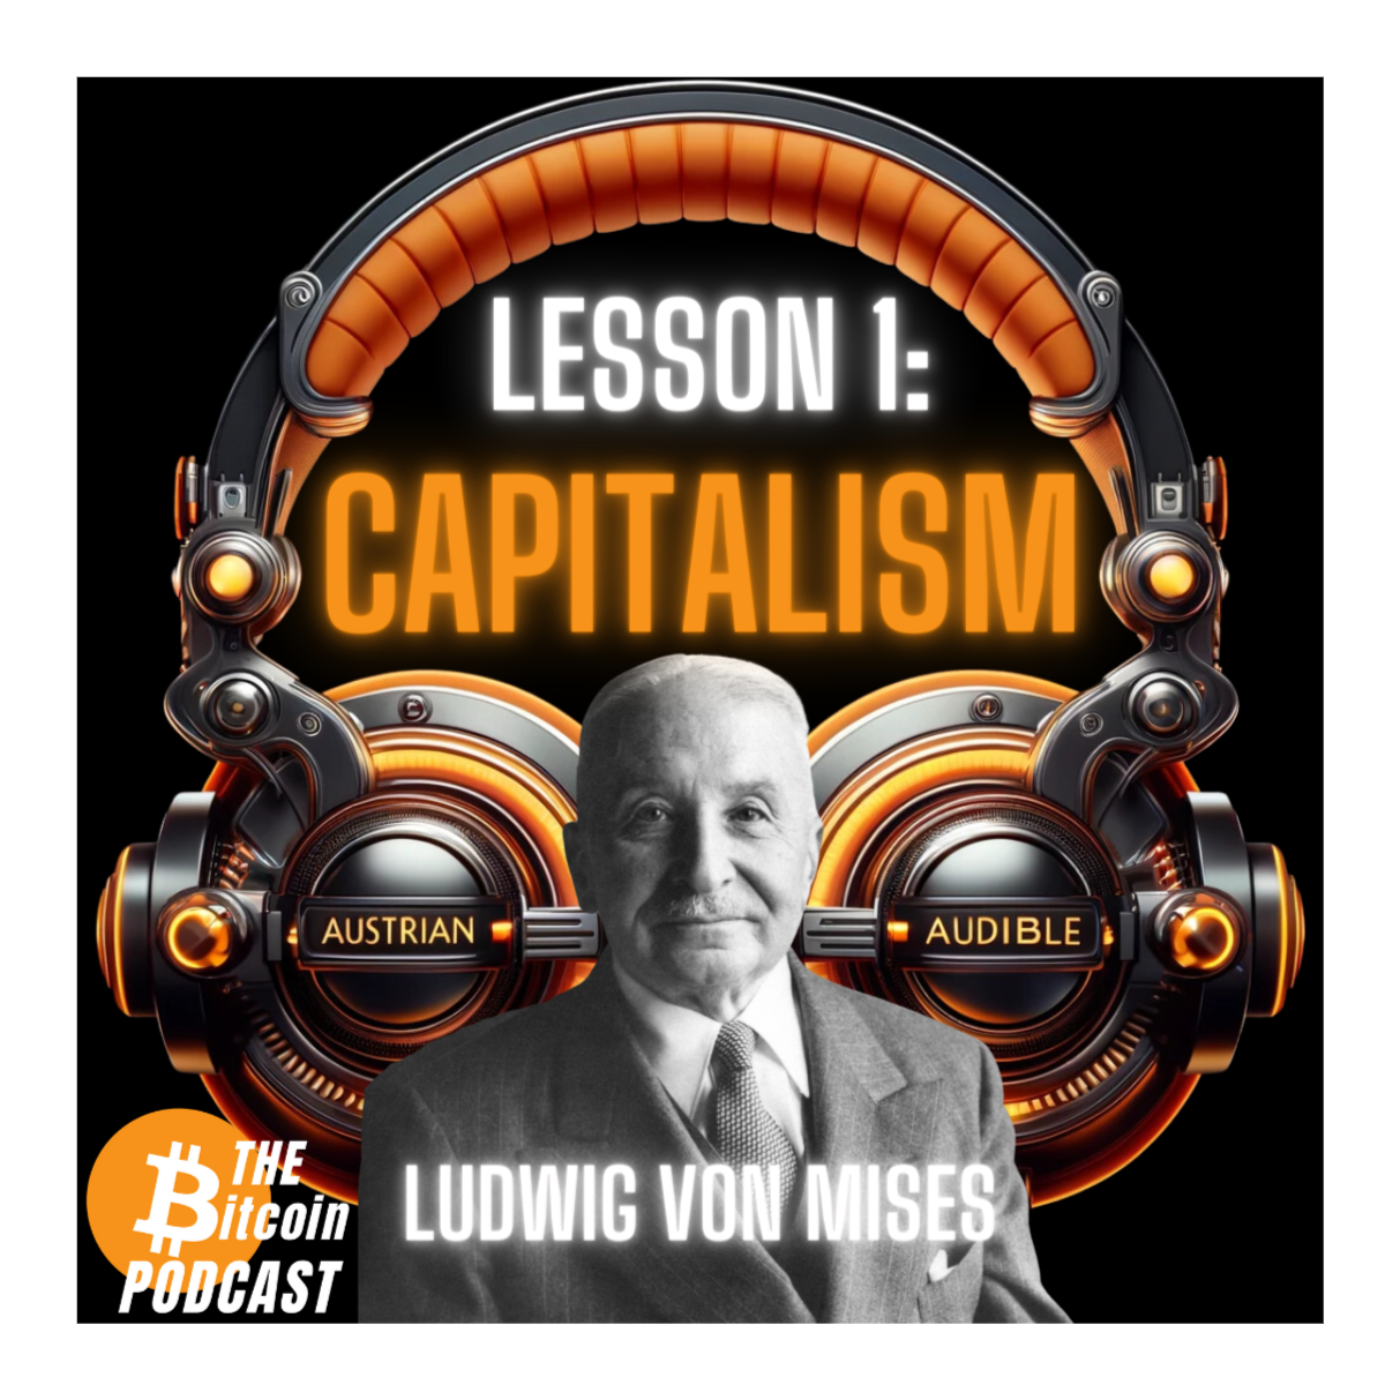 MISES' SIX LESSONS: #1 - CAPITALISM (Austrian Audible on THE Bitcoin Podcast)